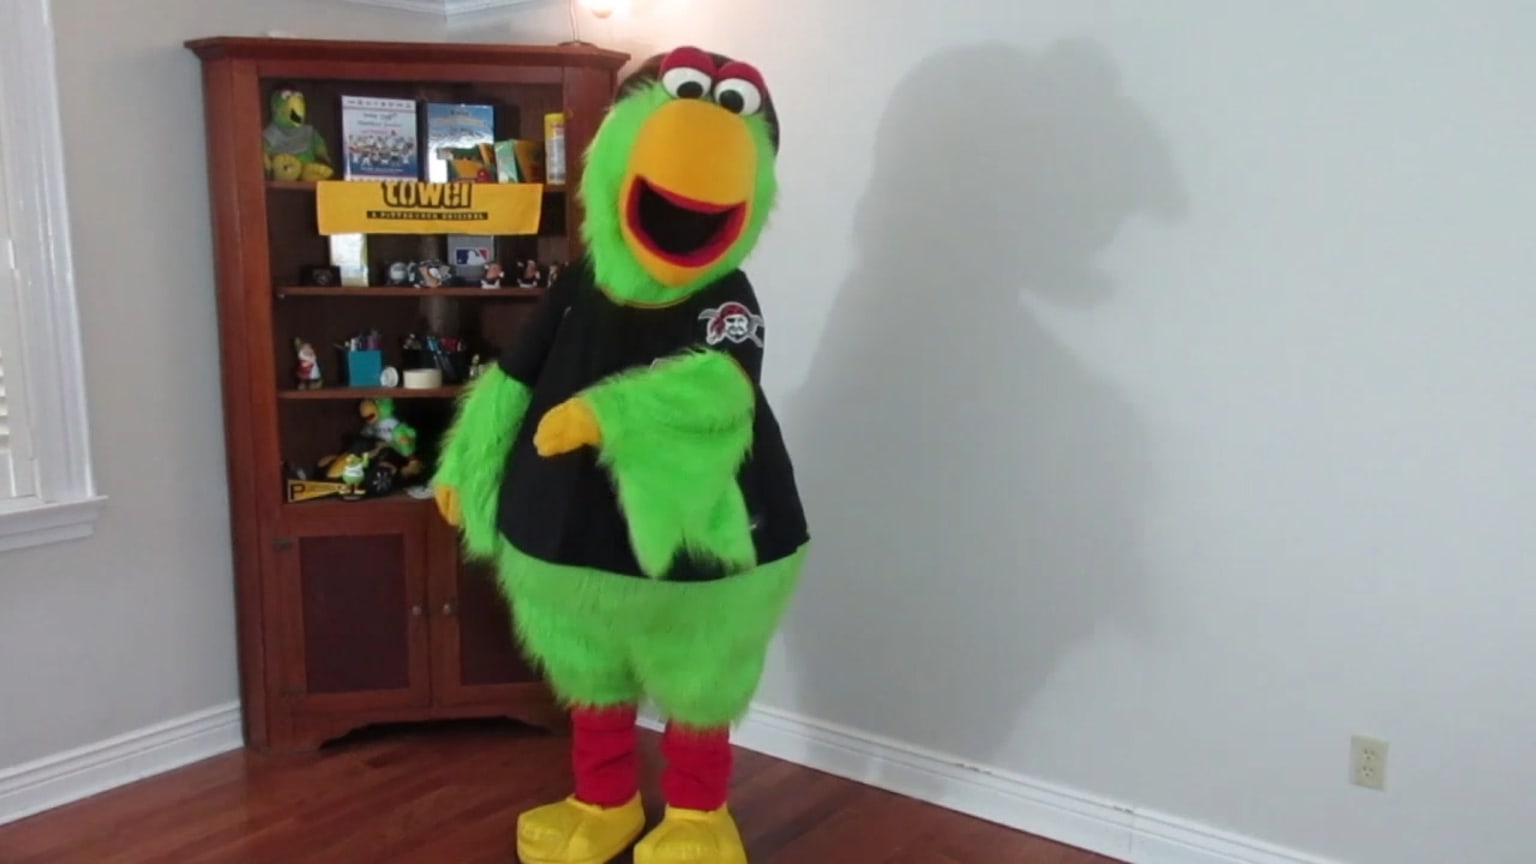 Get moving with Pirate Parrot, 04/15/2020